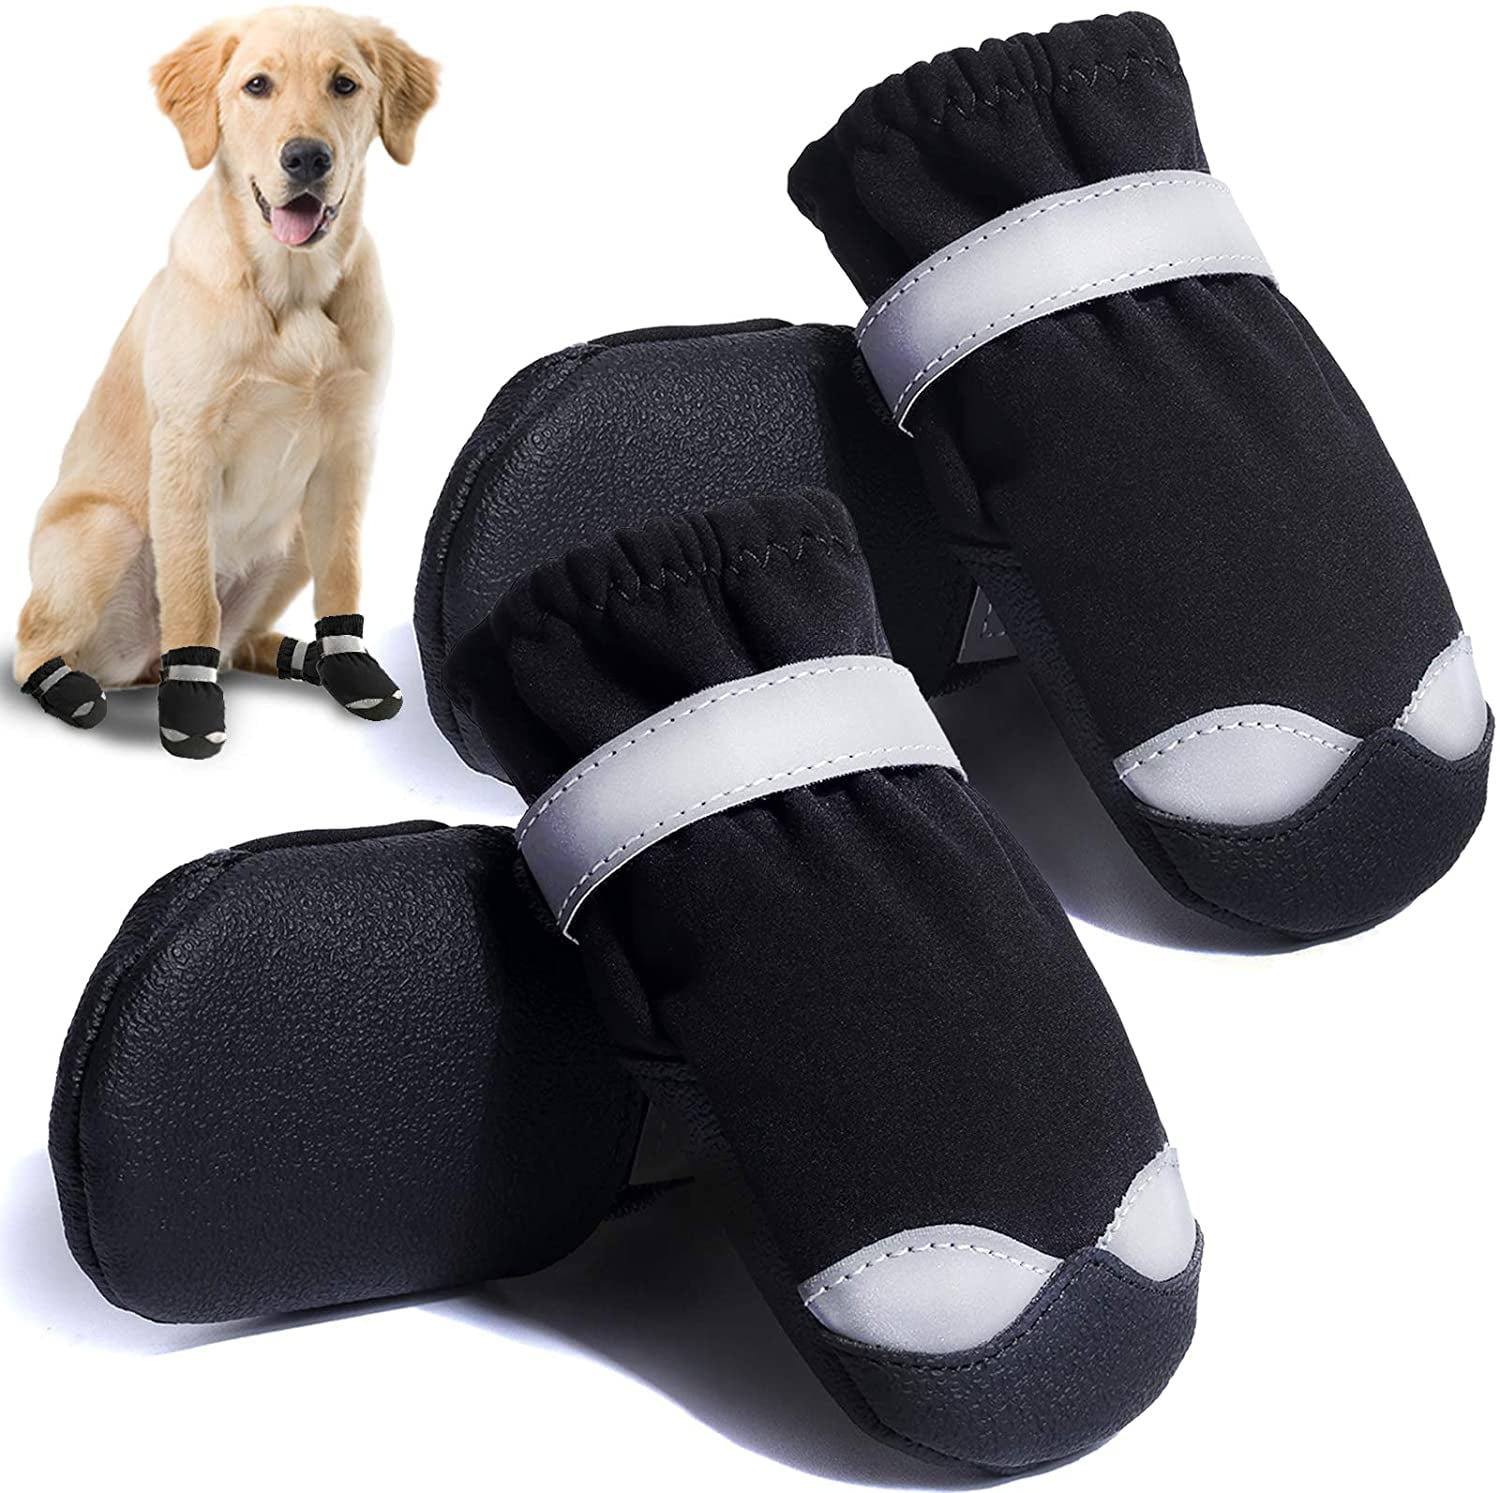 Dog Shoes Anti-Slip Dog Boots and Paw Protector for Small Medium Dogs 4PCS Dog Booties with Reflective Straps for Hot Pavement 